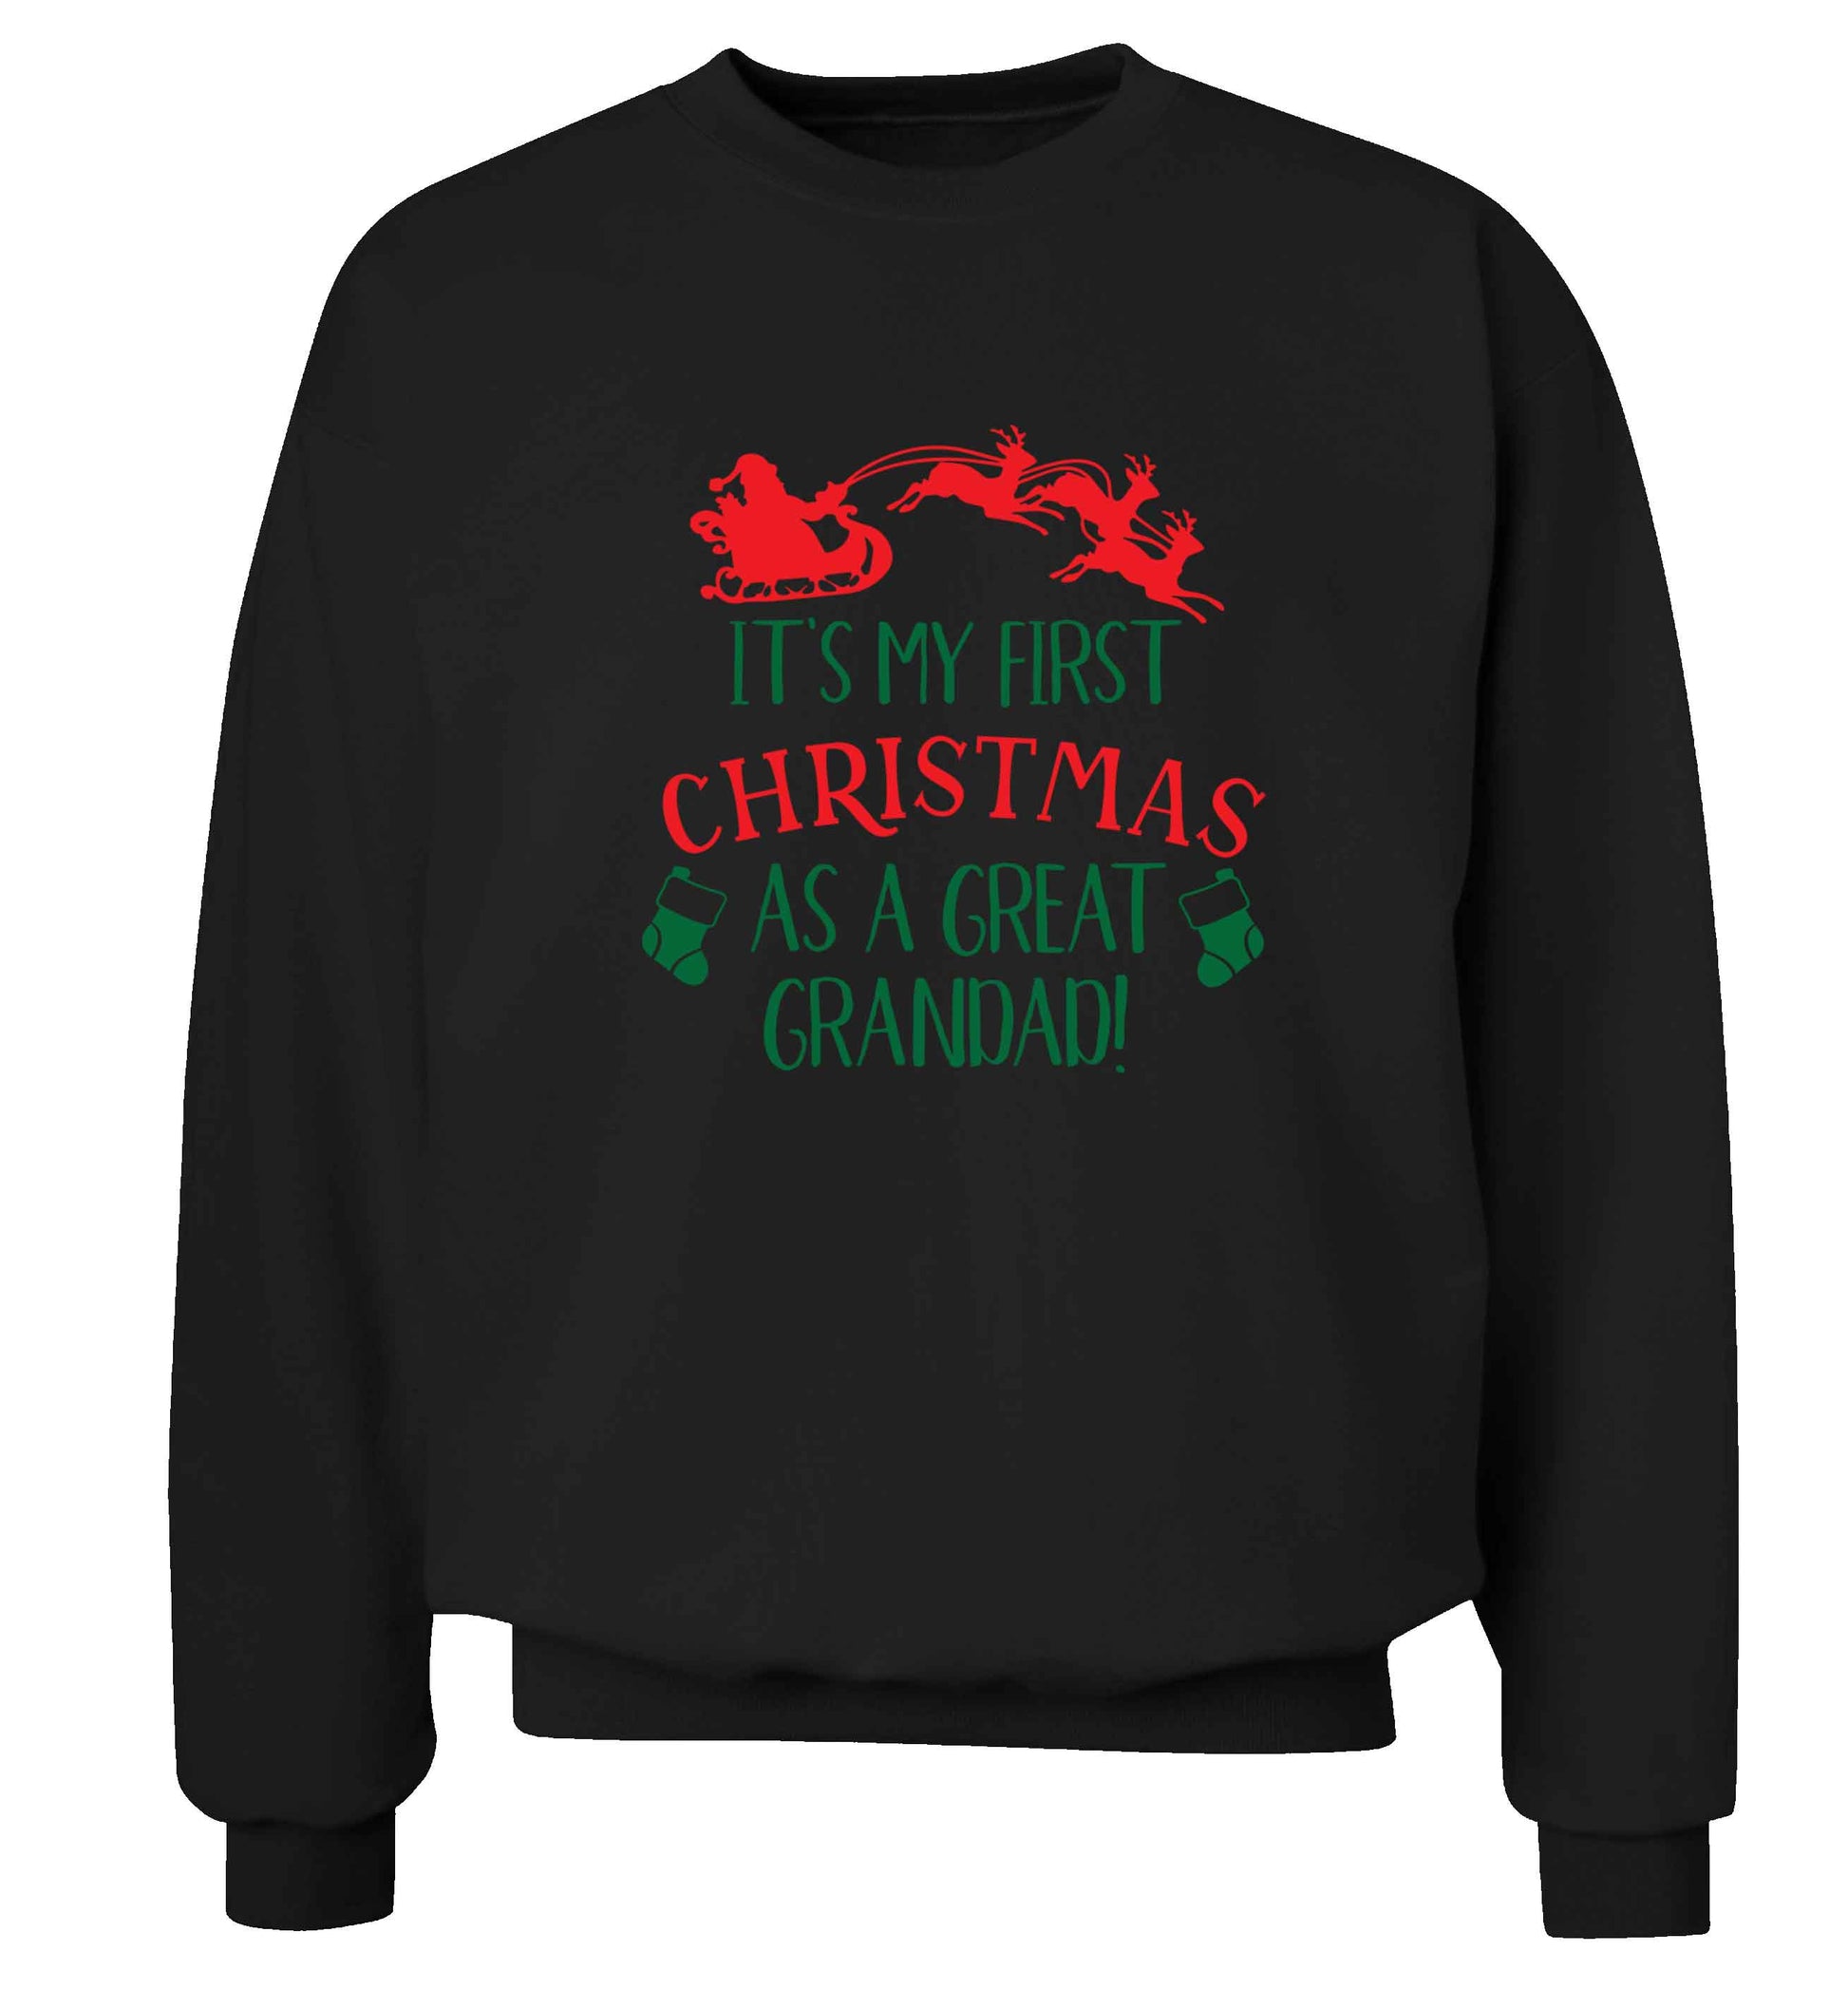 It's my first Christmas as a great grandad! Adult's unisex black Sweater 2XL